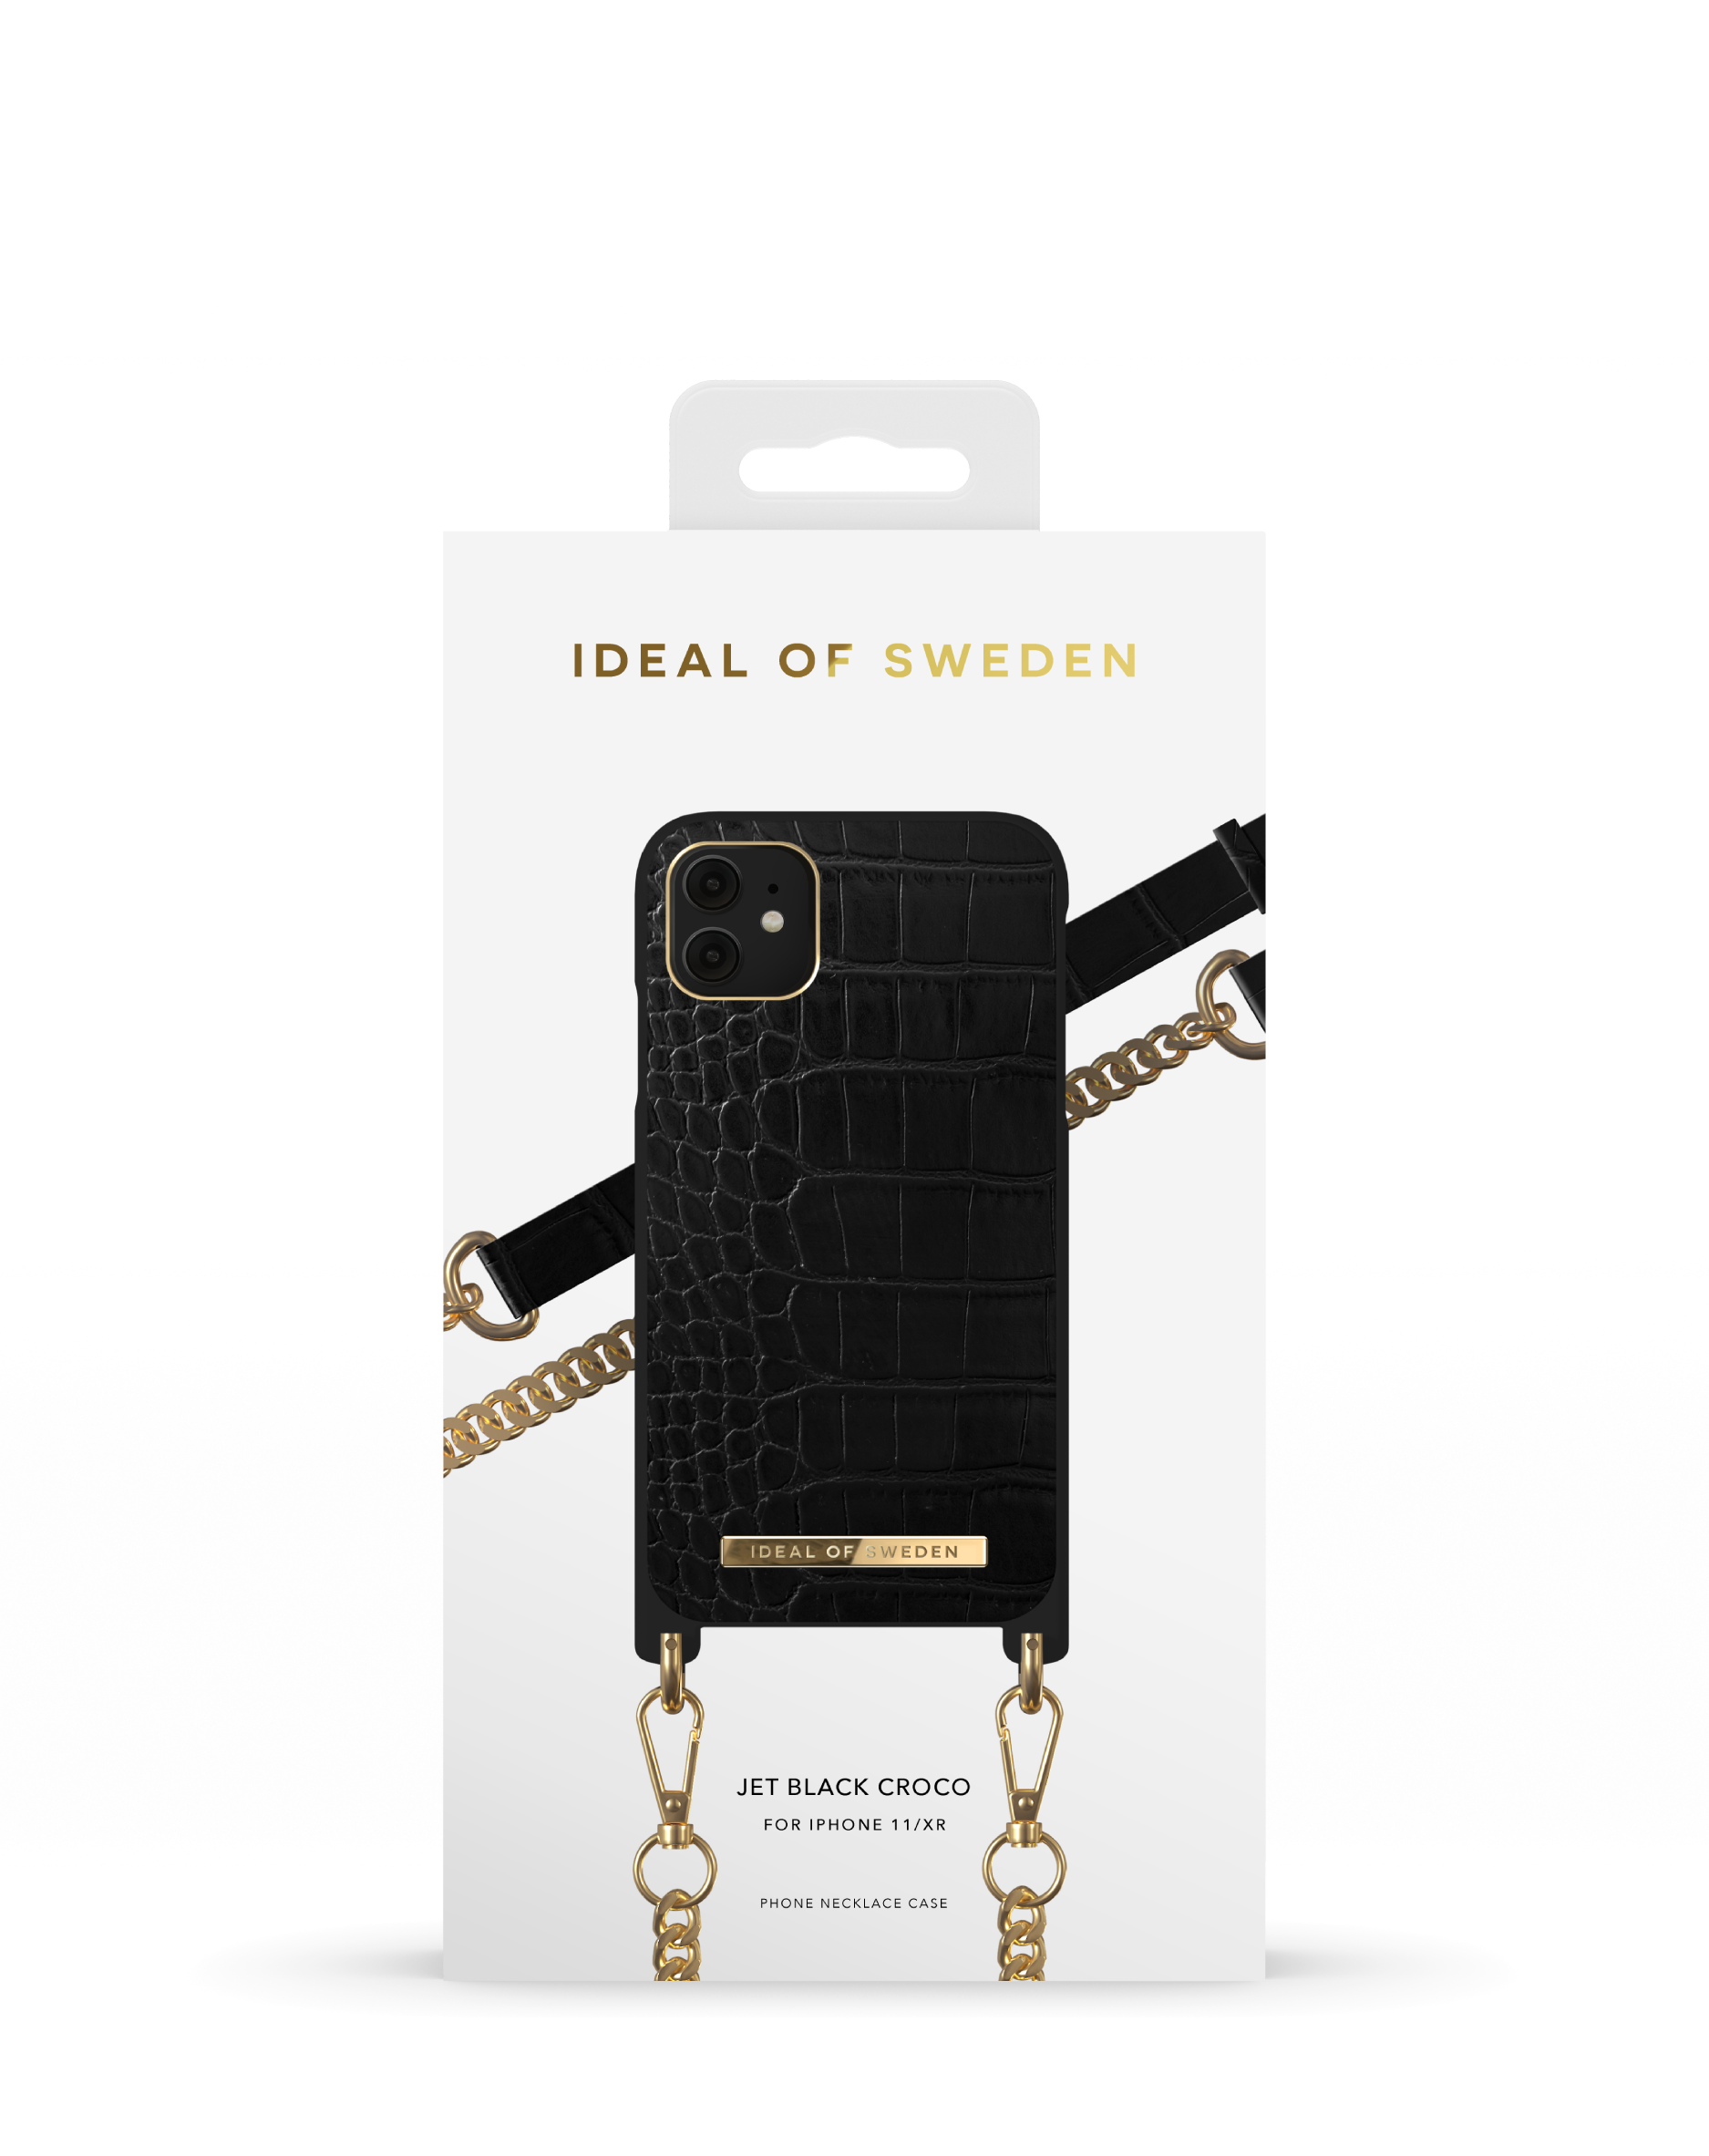 OF Black IDEAL iPhone XR, IDNCSS20-I1961-207, Backcover, Jet SWEDEN 11, Croco iPhone Apple,